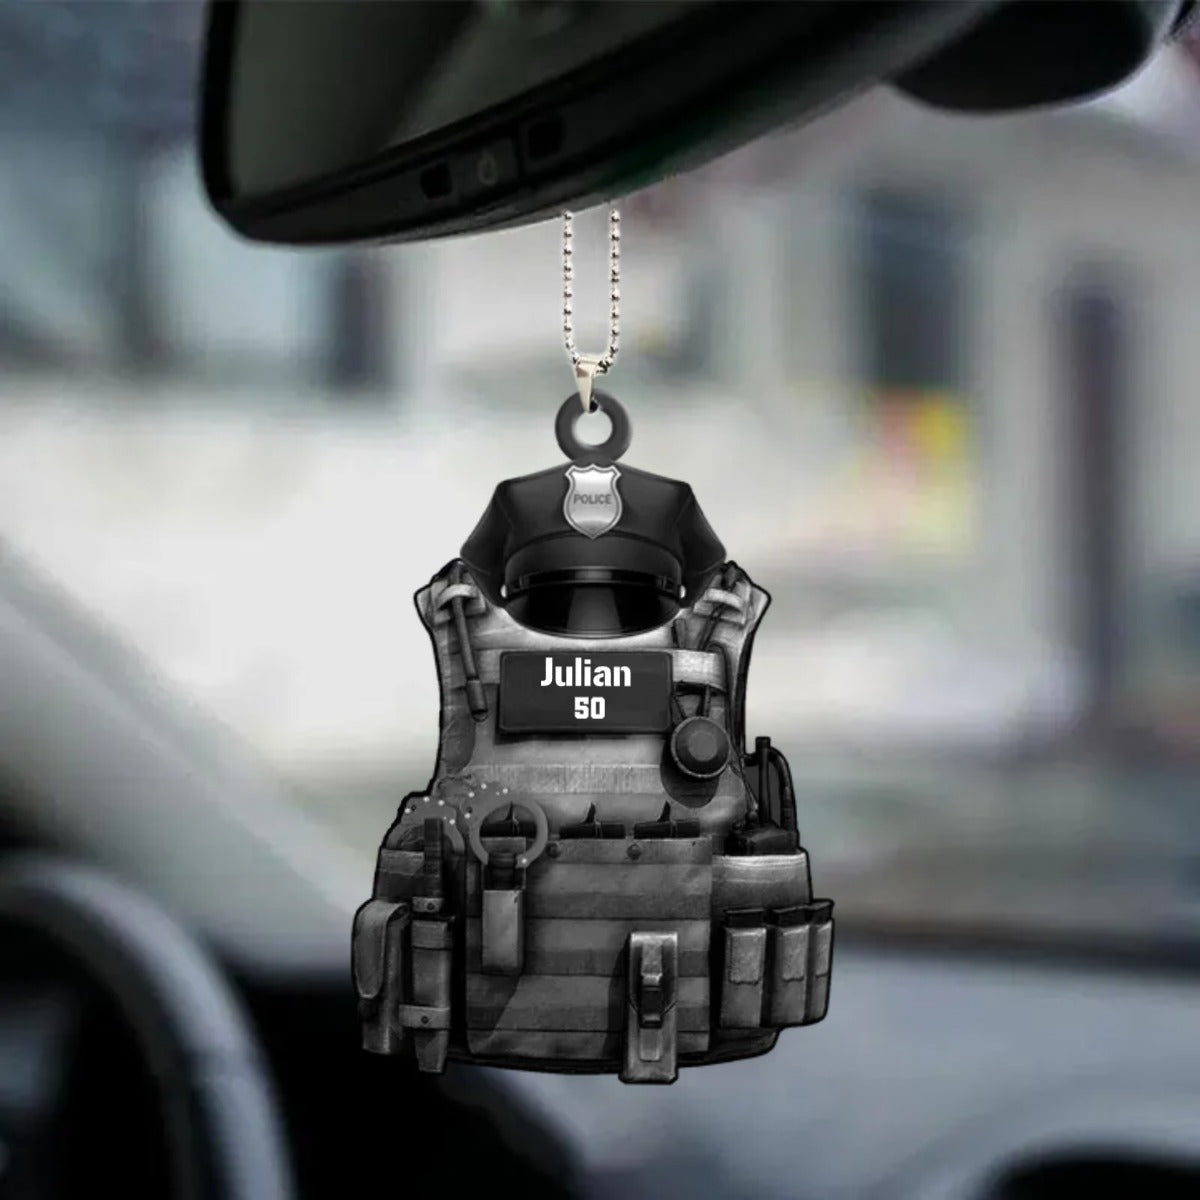 Personalized Police Car Hanging Ornament Police Bulletproof Vest With Service Cap Ornament